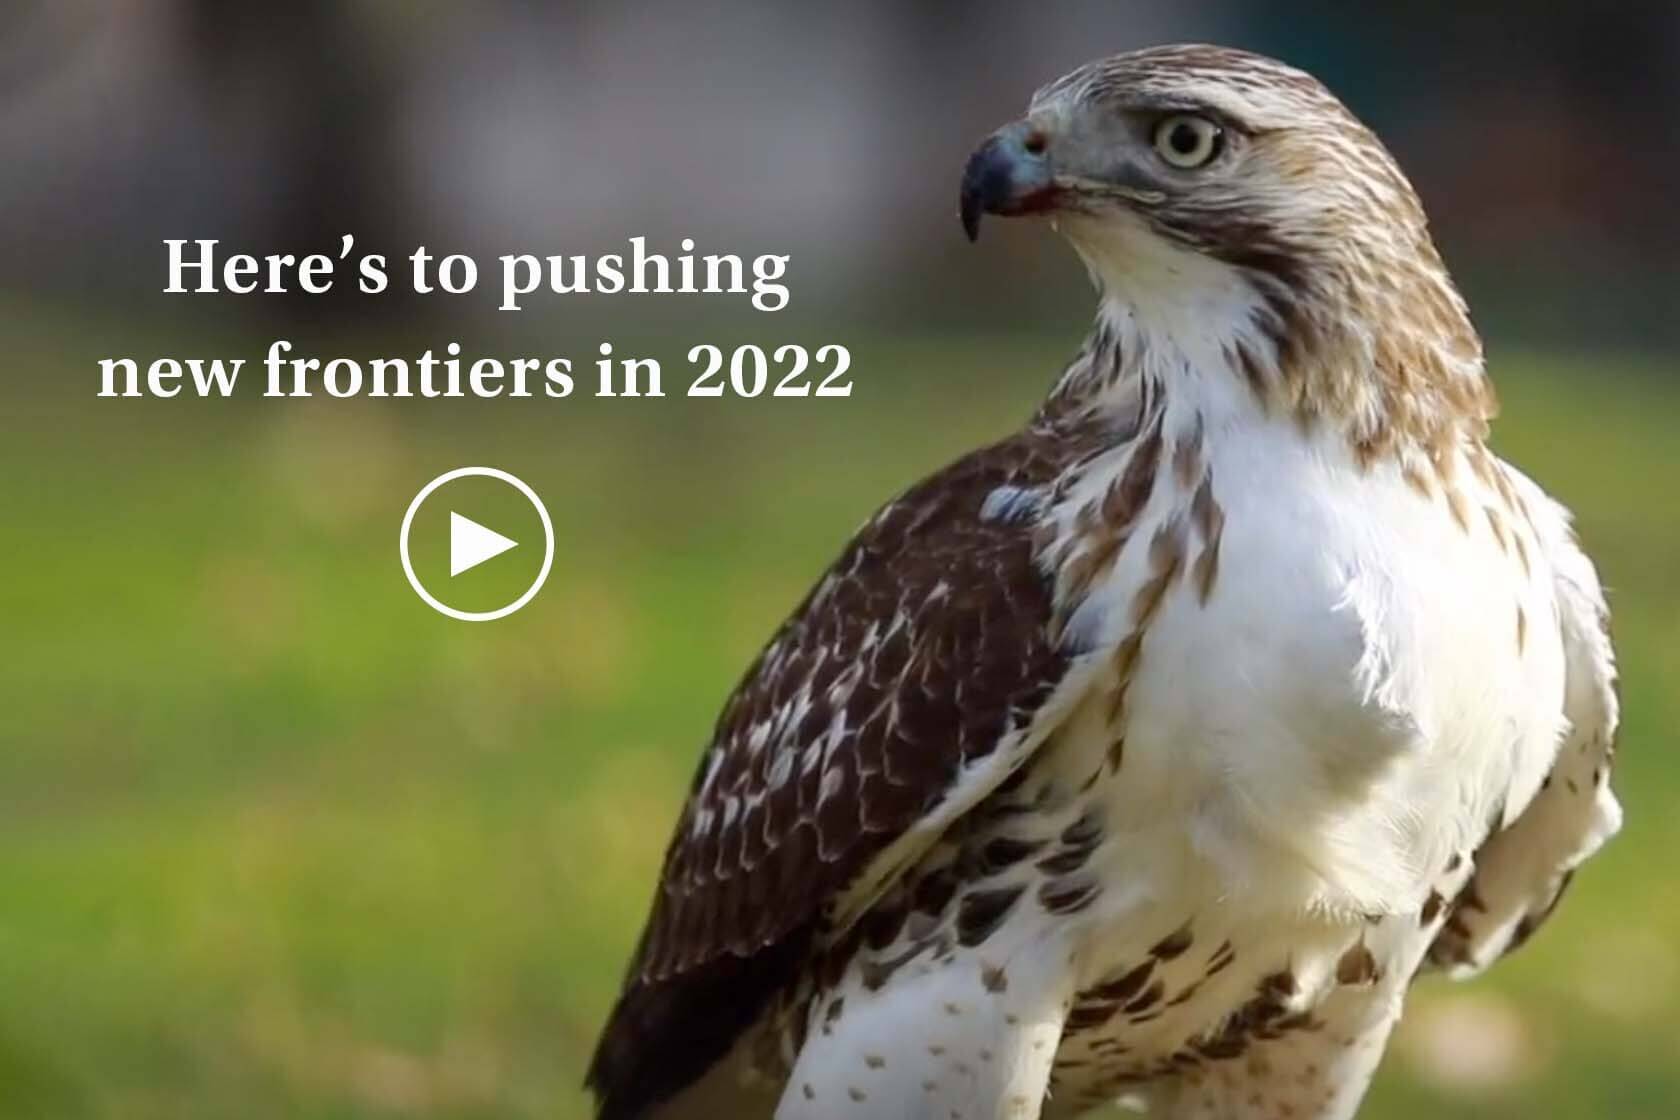 End-of-Semester Video Message: New Frontiers in 2022